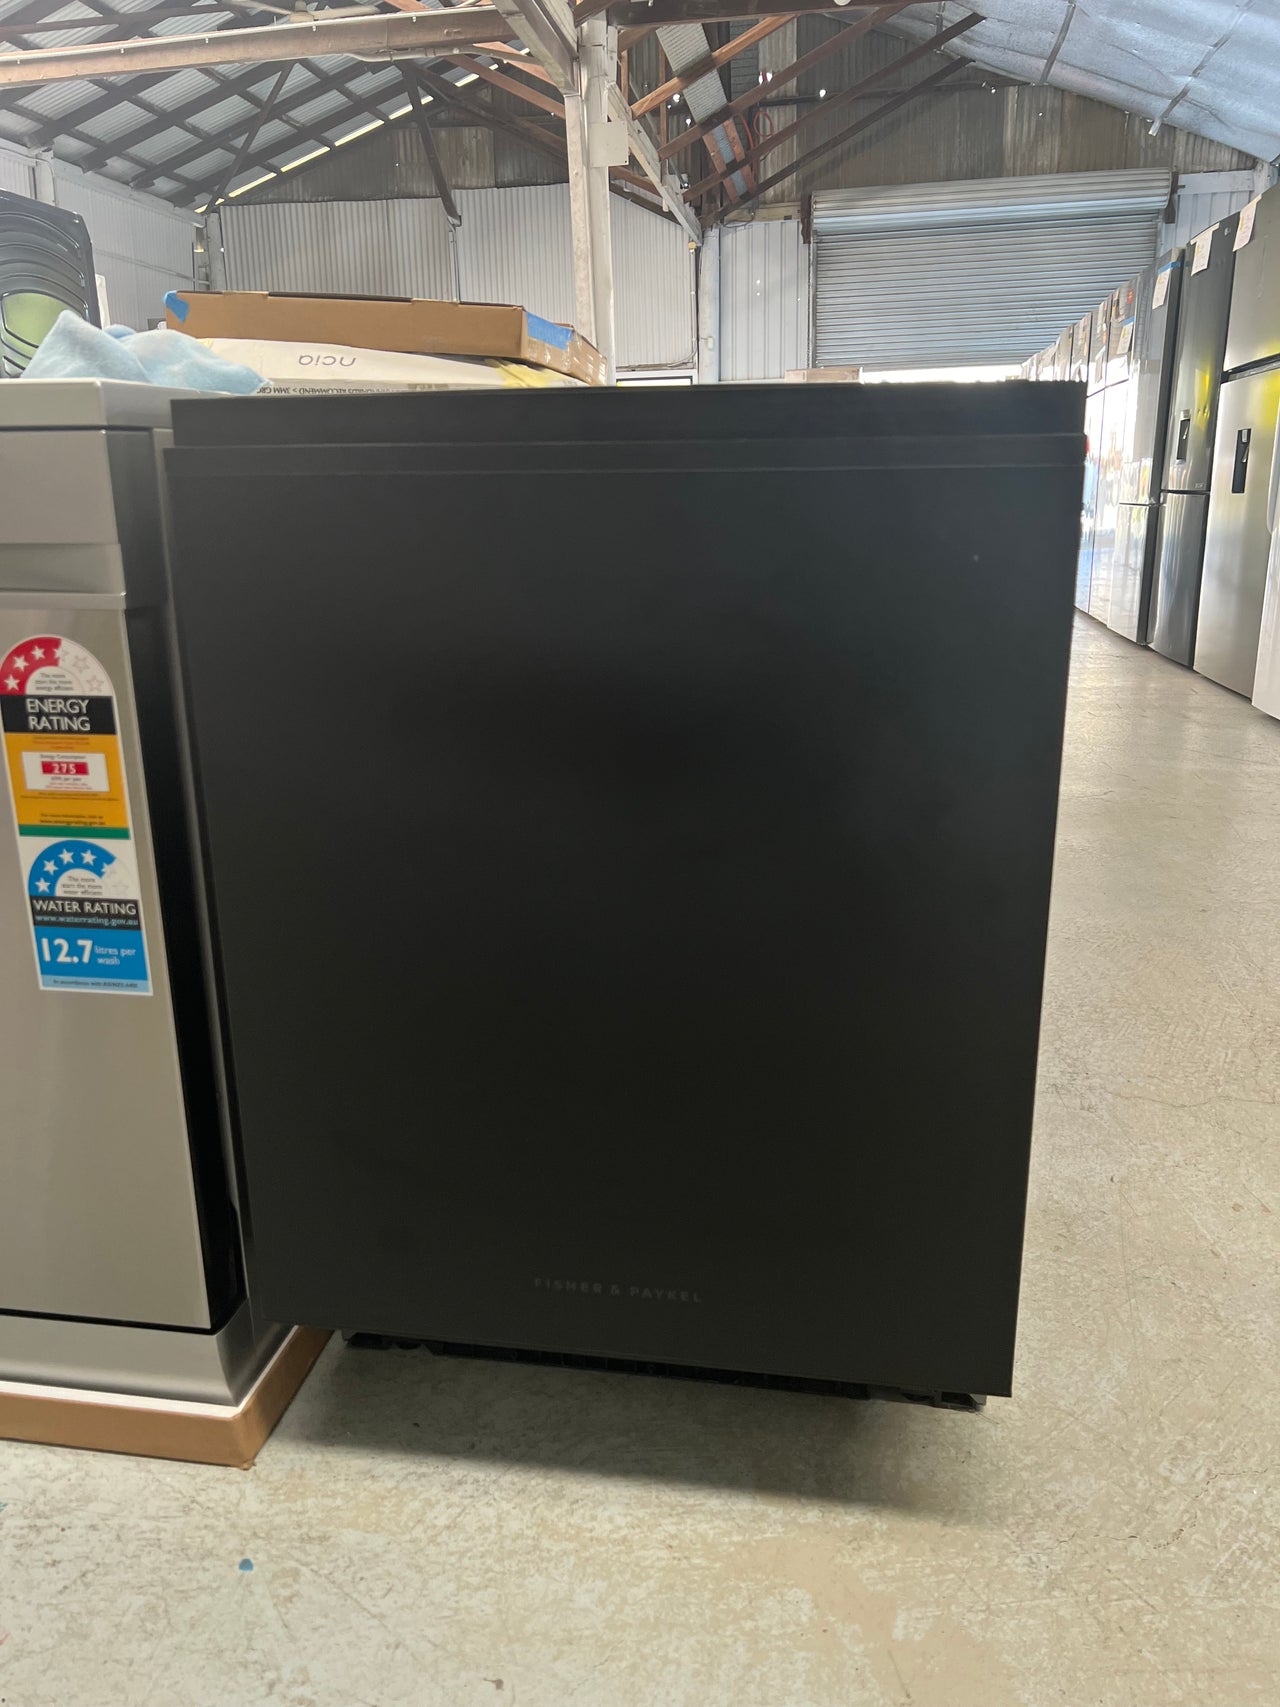 Factory second FISHER & PAYKEL SERIES 7 TALL BUILT UNDER DISHWASHER WITH SANITISE BLACK DW60UZT4B2 - Second Hand Appliances Geebung